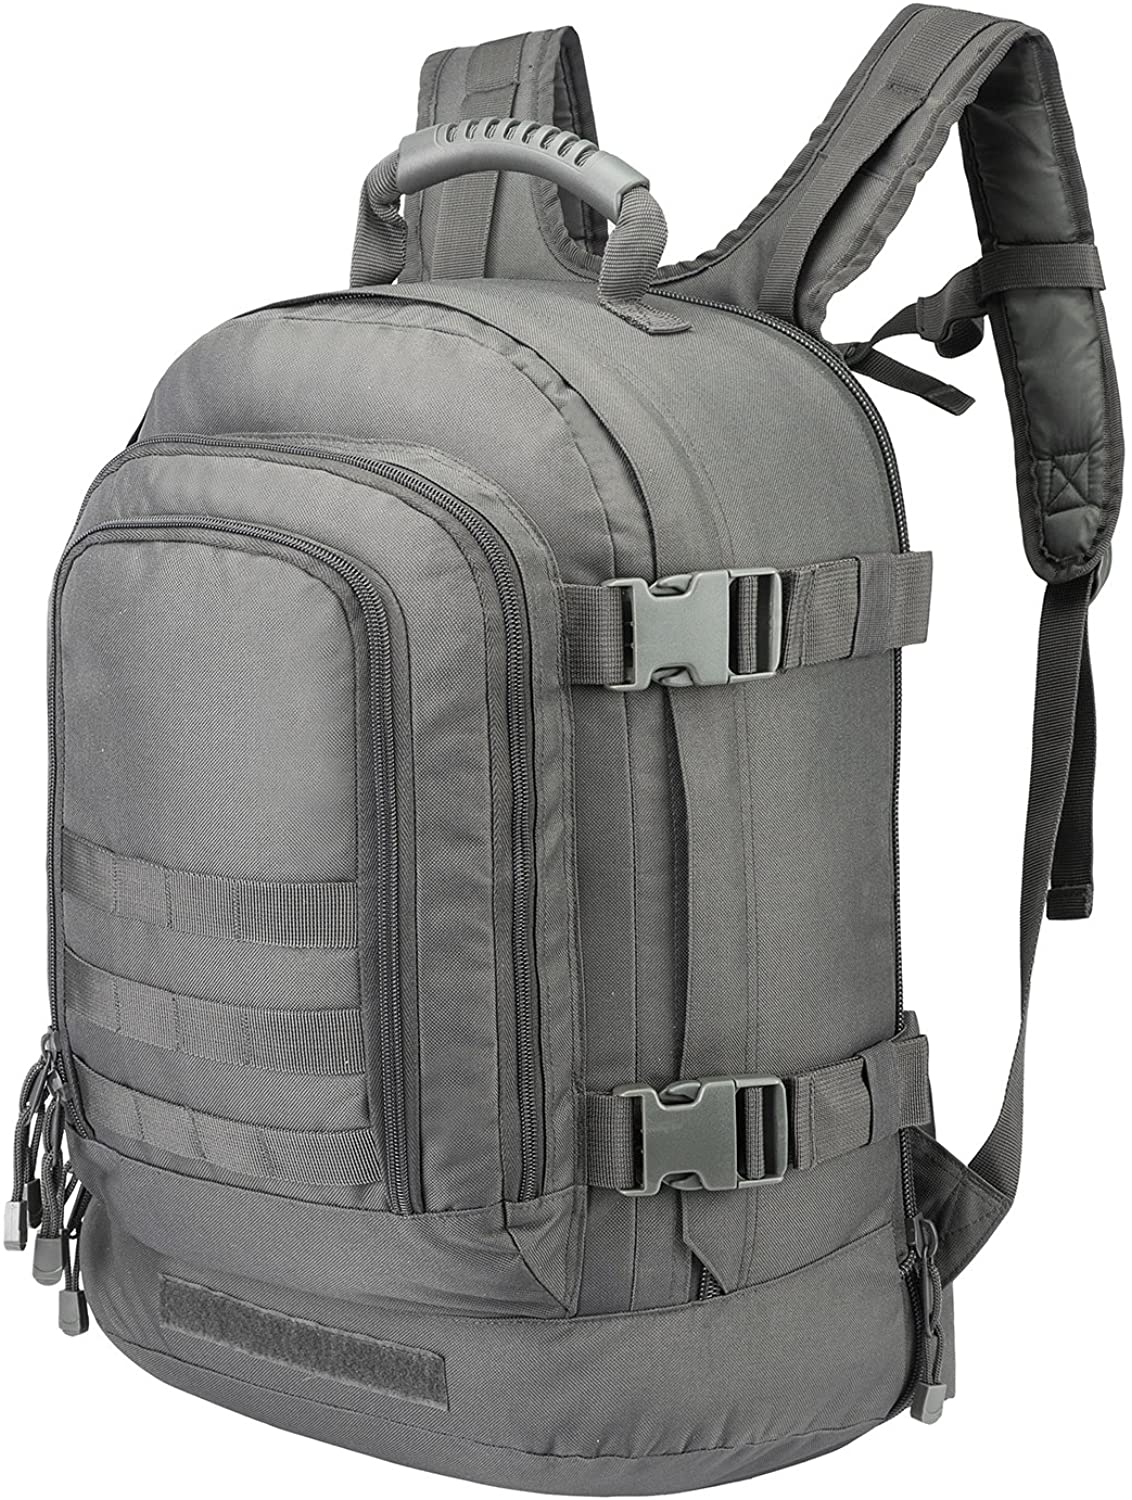 Expandable Backpack 39L-64L Large Military Tactical Bug Out Bag Wth Wa –  USA Camp Gear